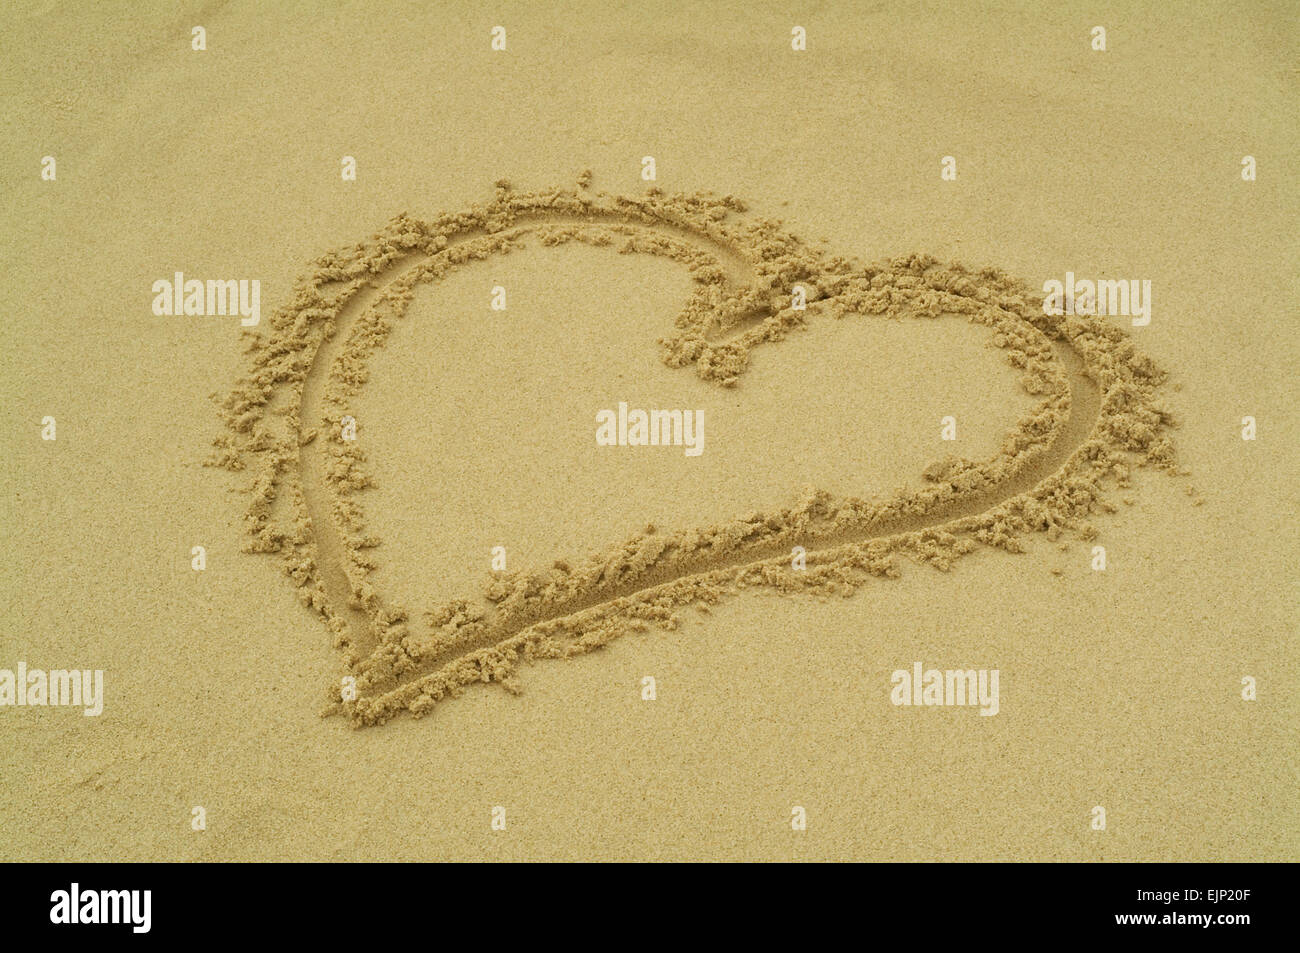 A heart painted in the sand beach Stock Photo